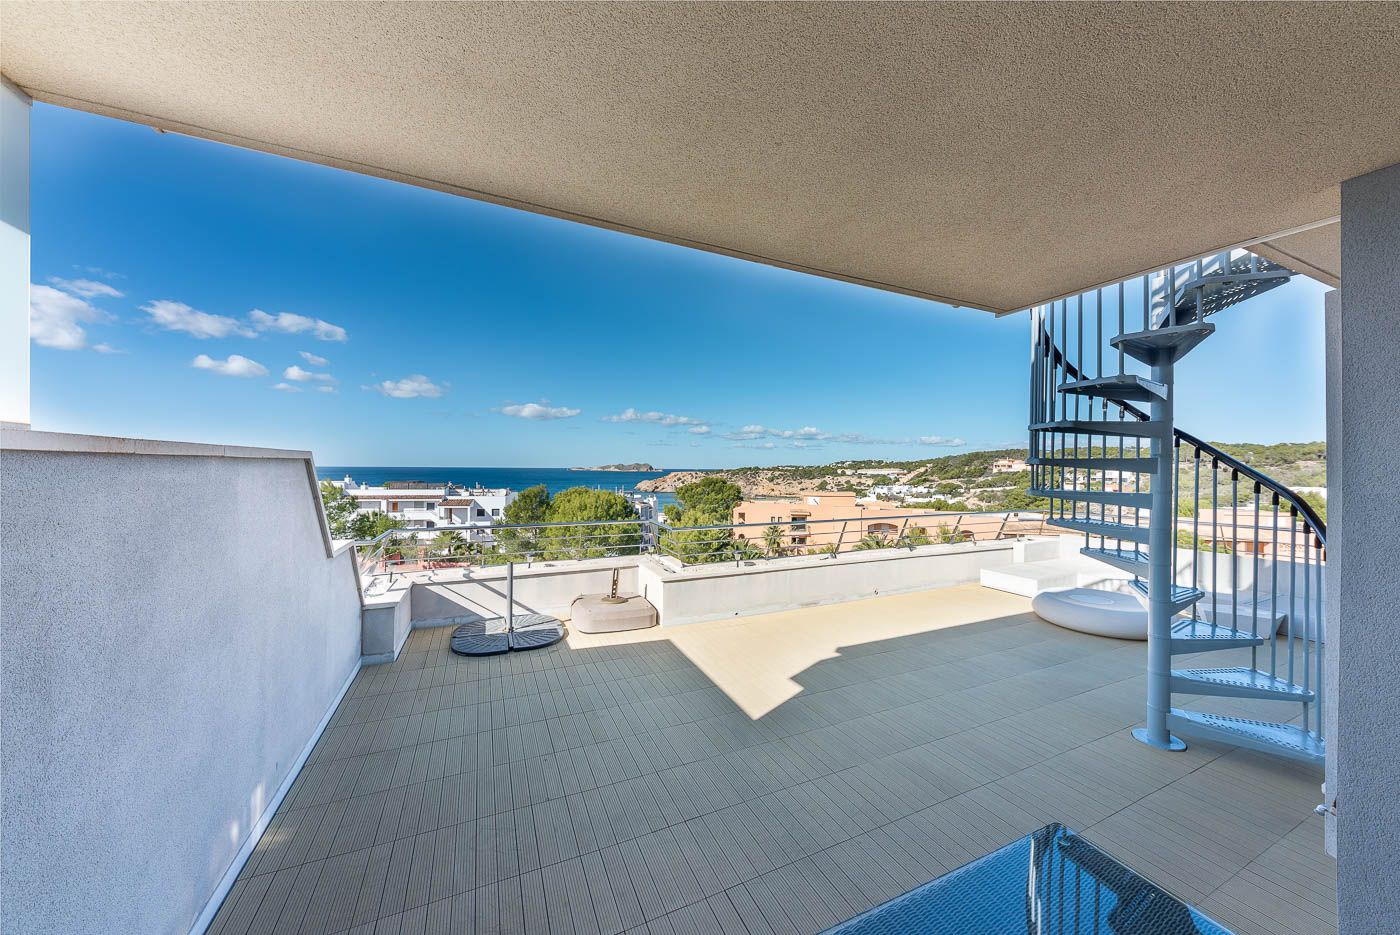 Penthouse with fantastic sea views and walking distance in Cala Tarida